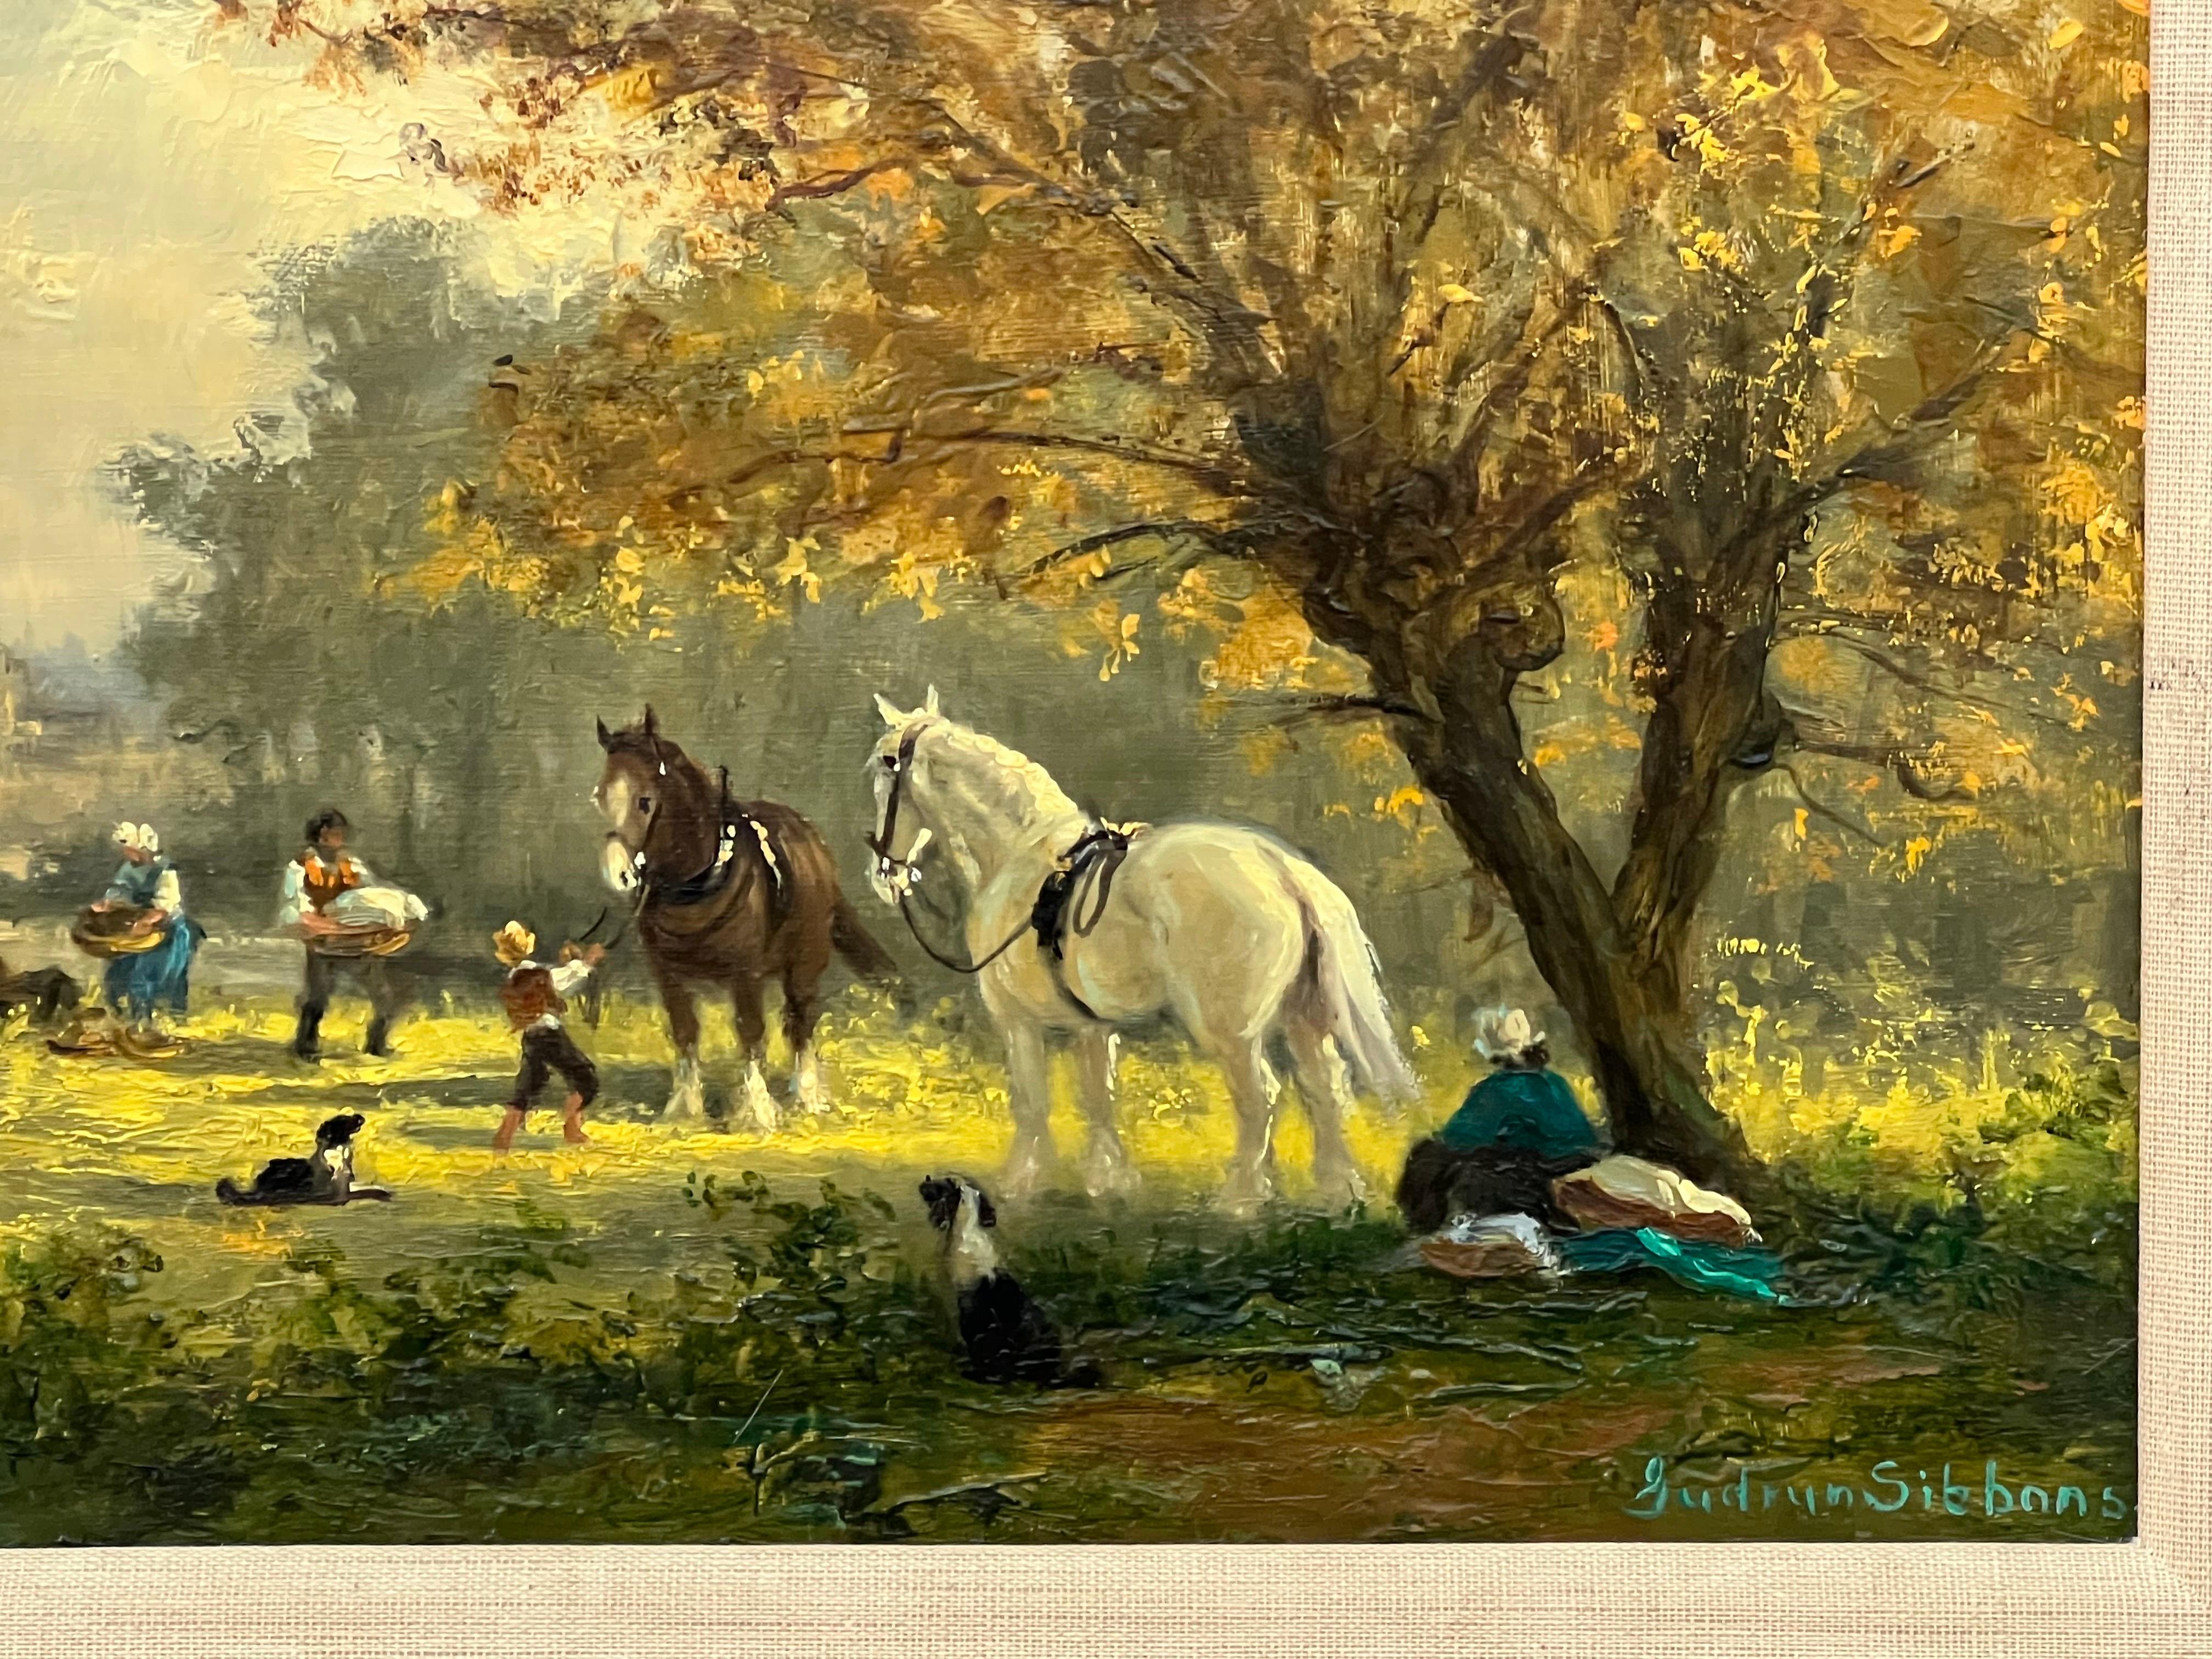 Idyllic Countryside Scene with River Boat, Horses, Figures & Dogs in Sunshine - Painting by Gudrun Sibbons